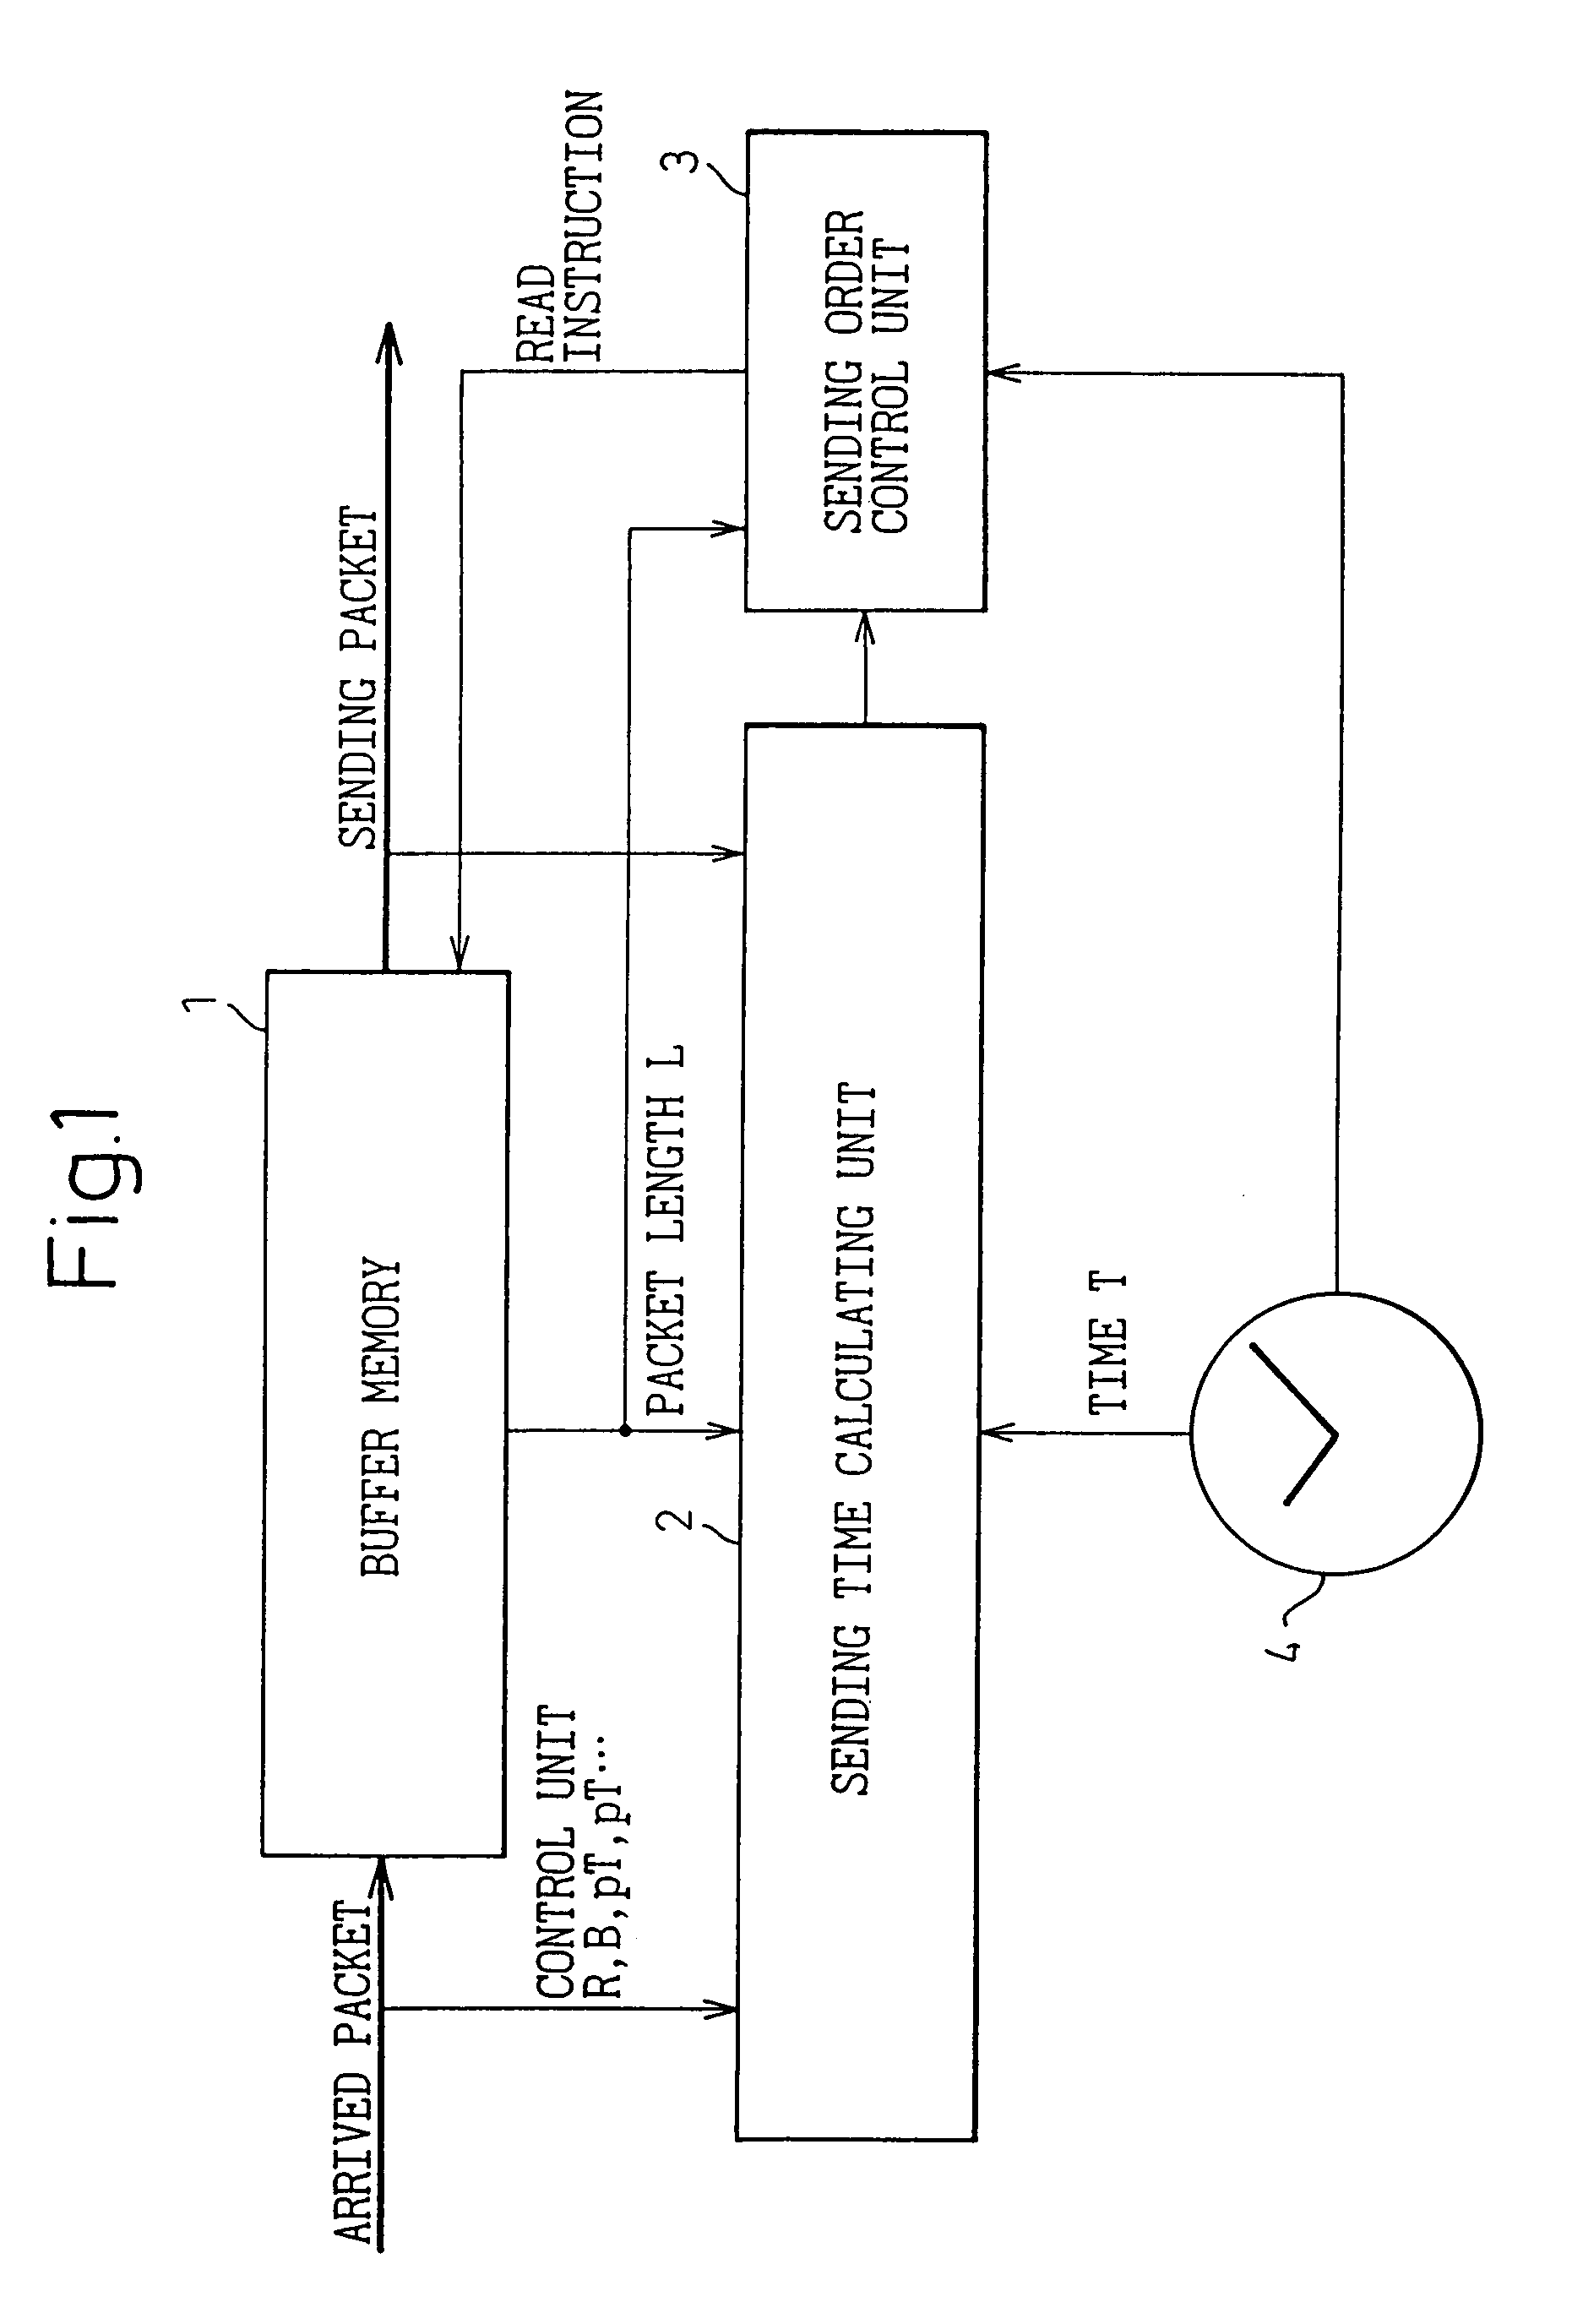 Packet flow control apparatus and a method for controlling the same